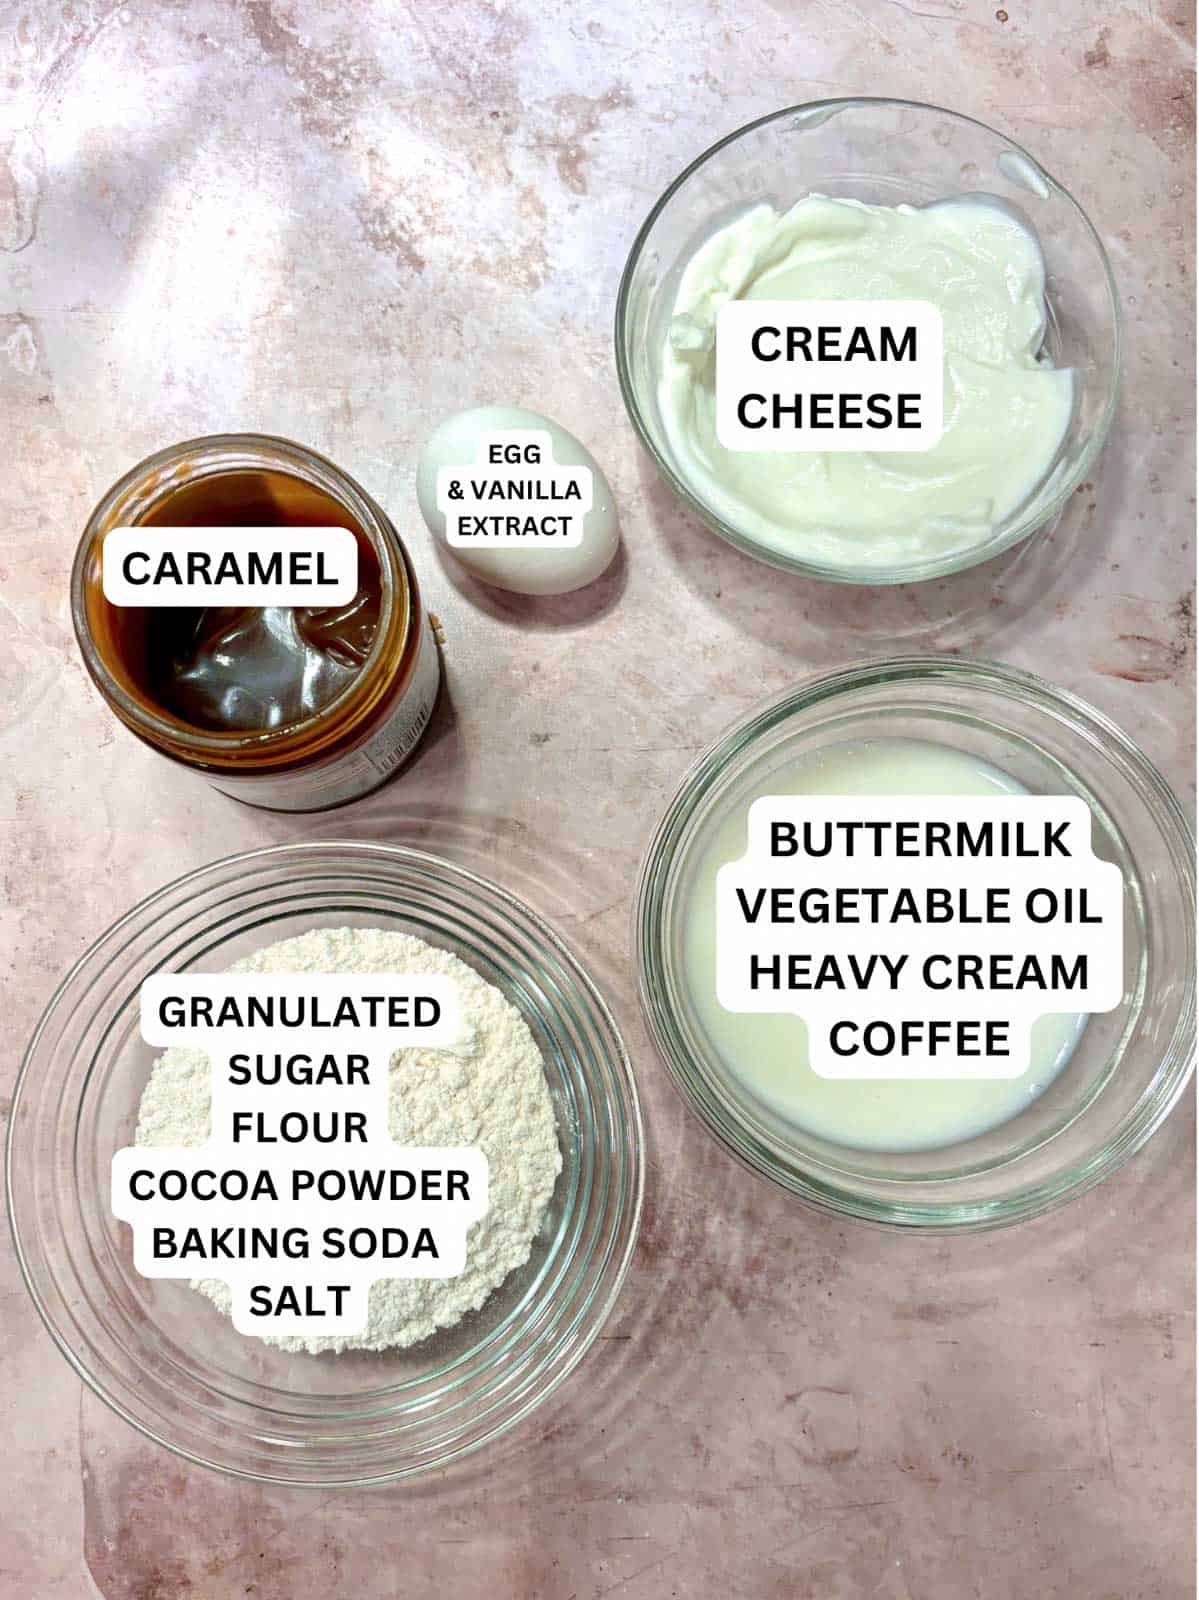 Ingredients consisting of cream cheese, cocoa powder, flour, sugar, baking soda, buttermilk, oil, caramel, and egg on the counter.